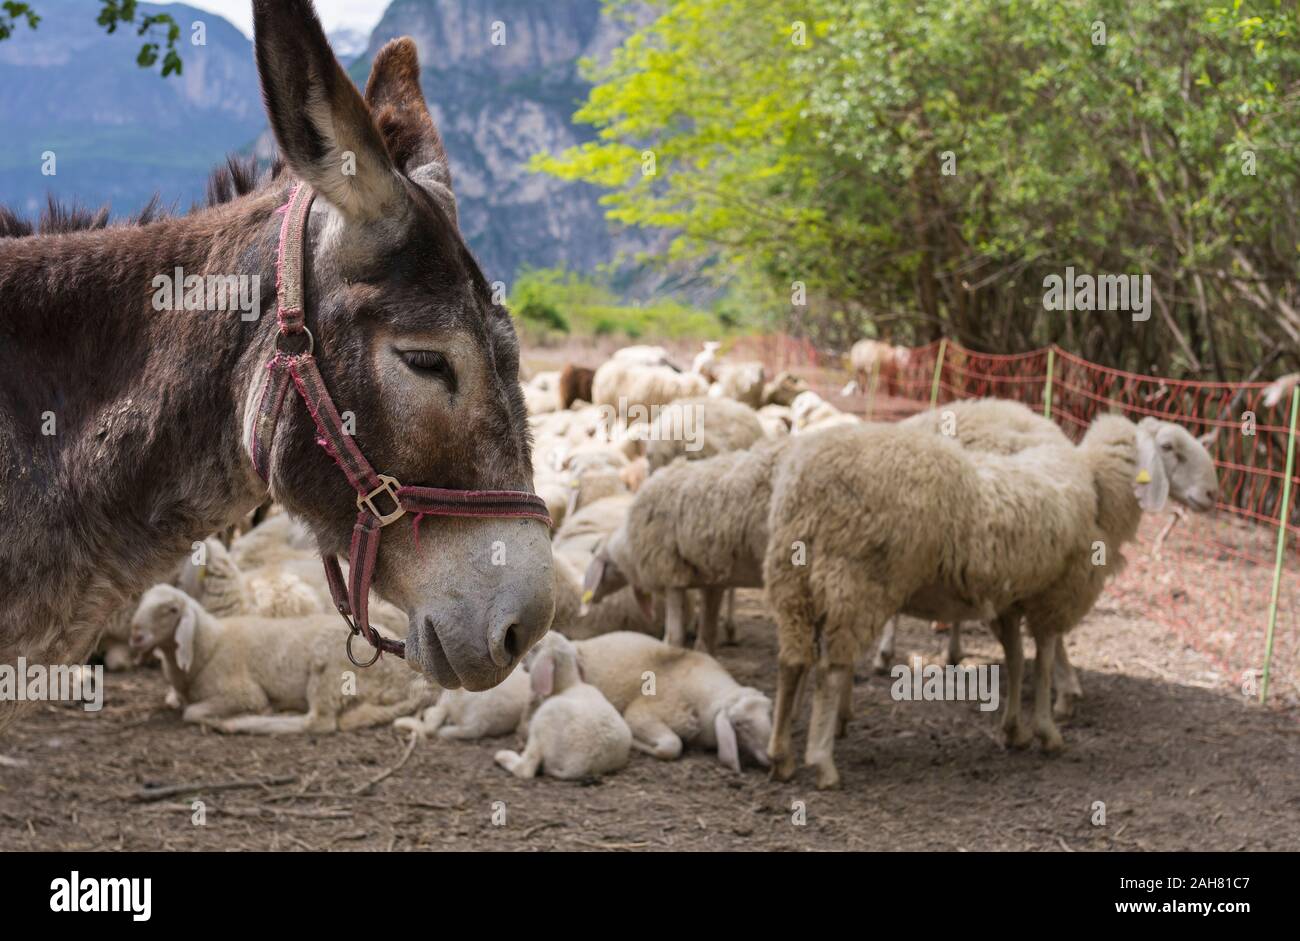 close-up of a brown donkey with red head collar and the Flock of sheep. Stock Photo